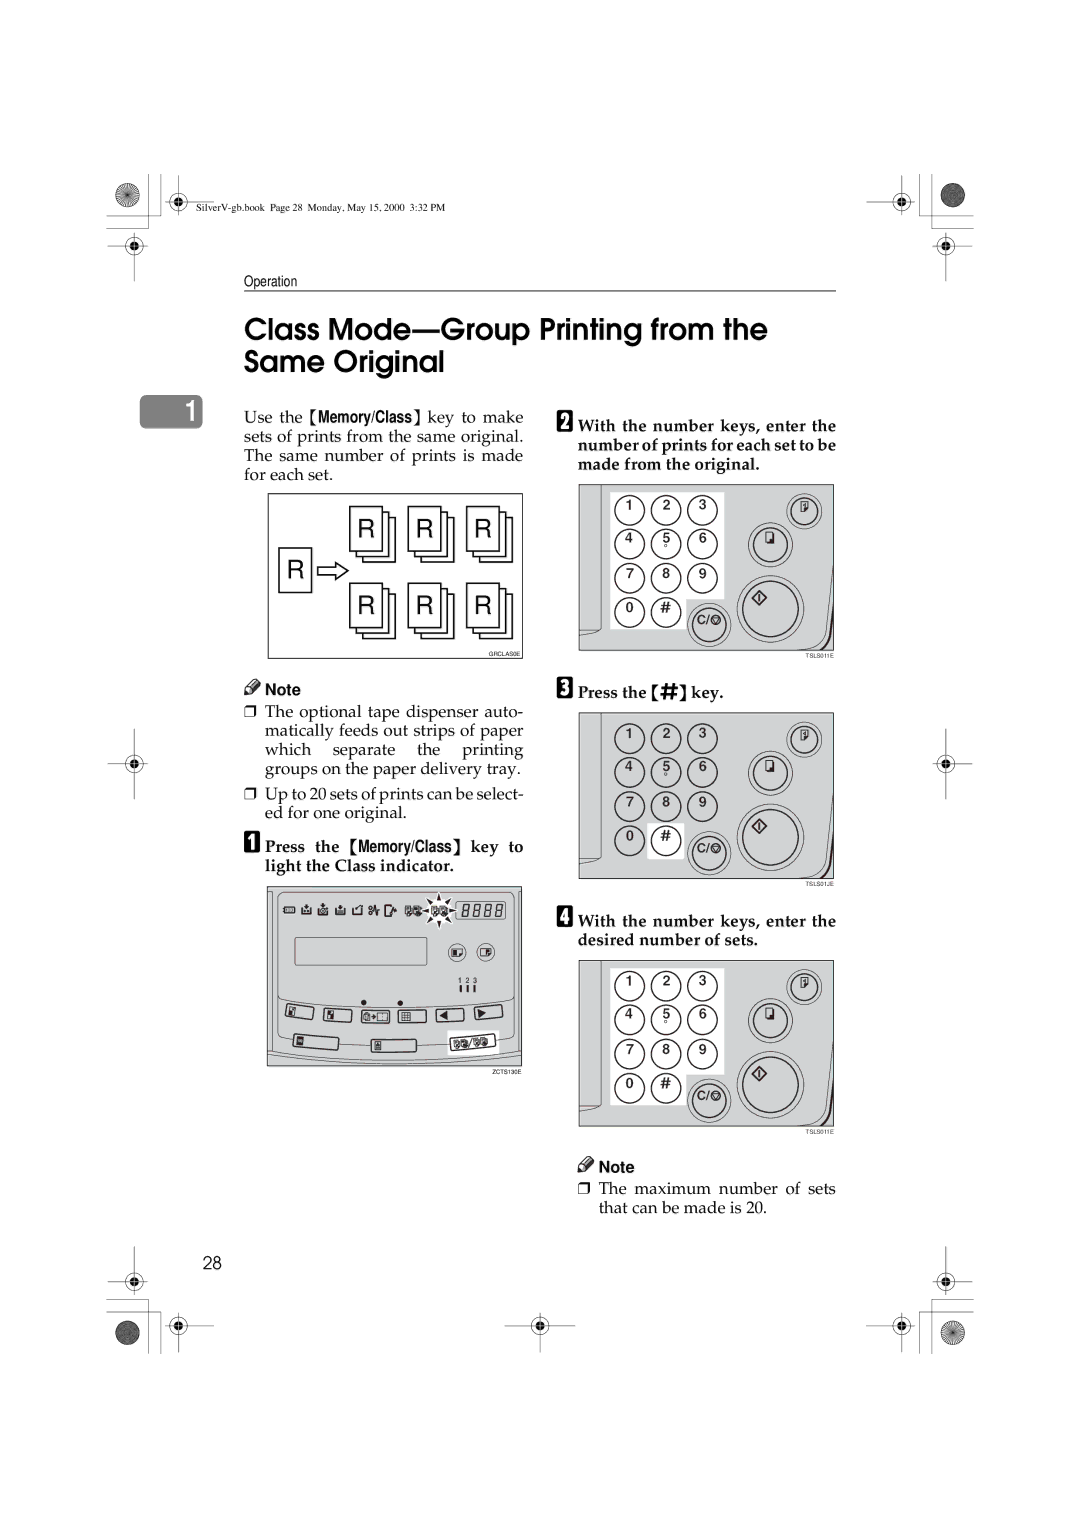 Ricoh Priport Class Mode-Group Printing from the Same Original, Press the Memory/Class key to light the Class indicator 